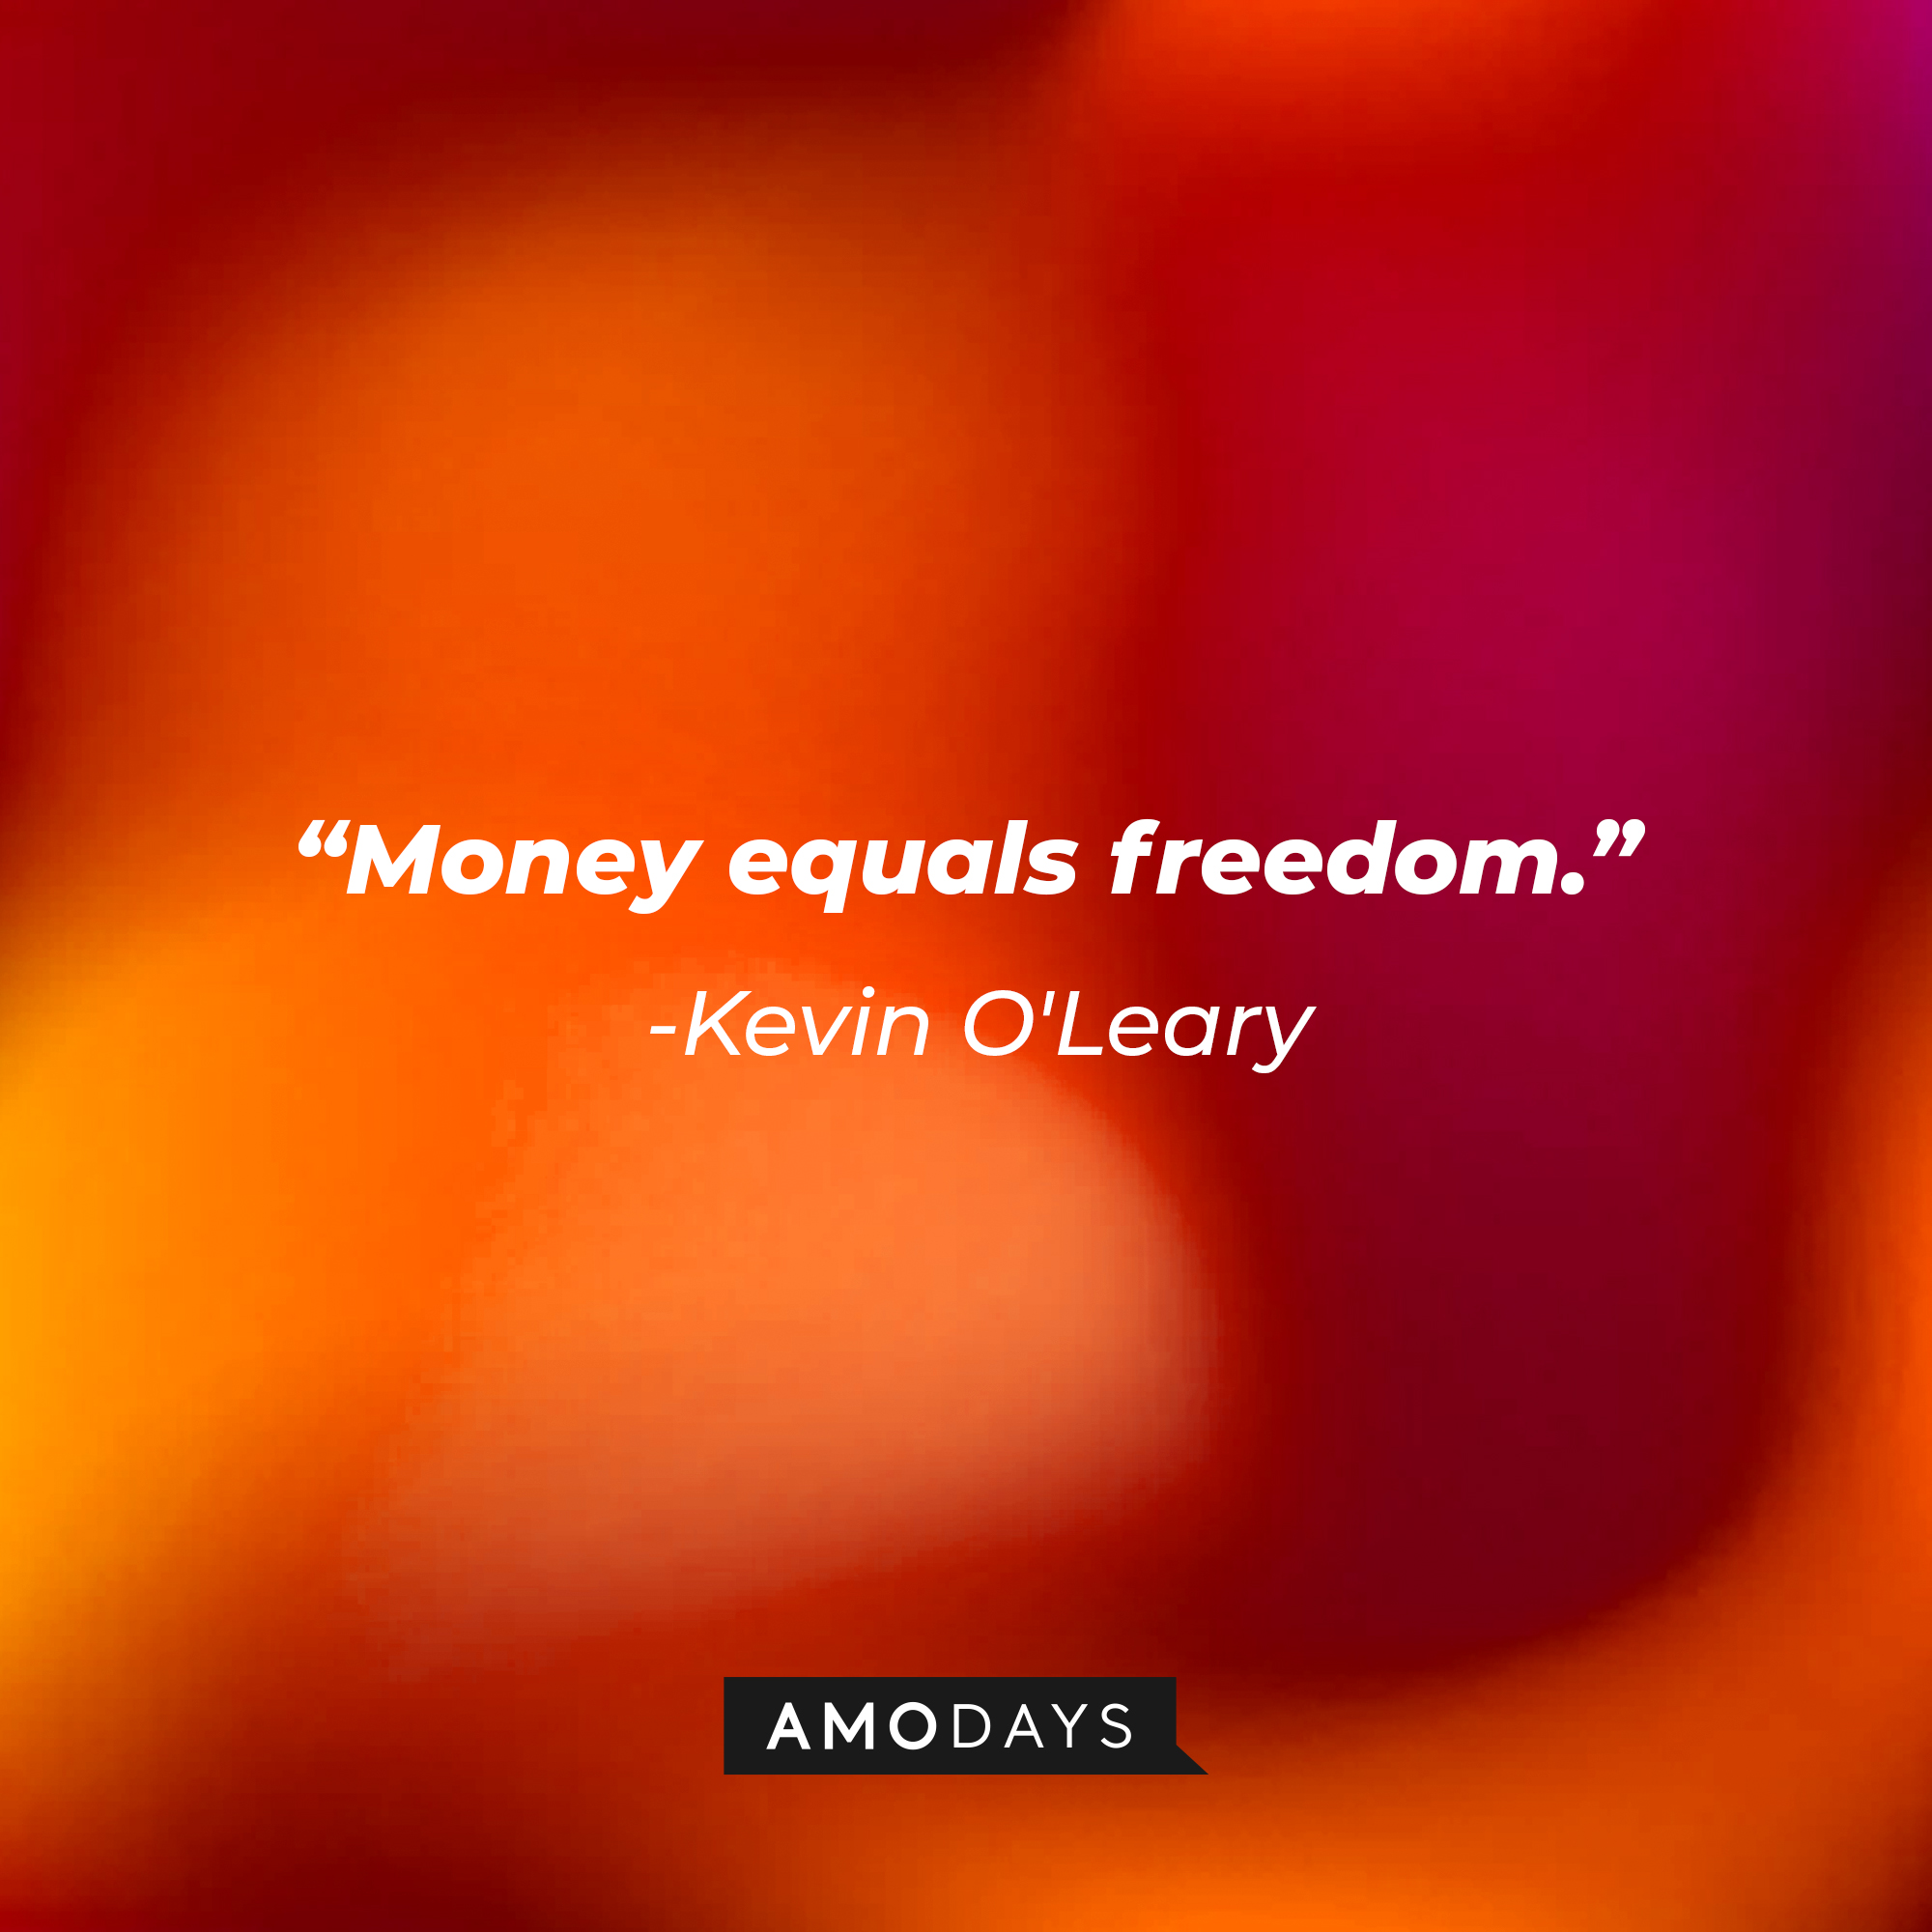 A photo with Kevin O'Leary's quotes, "Money equals freedom." | Source: Amodays